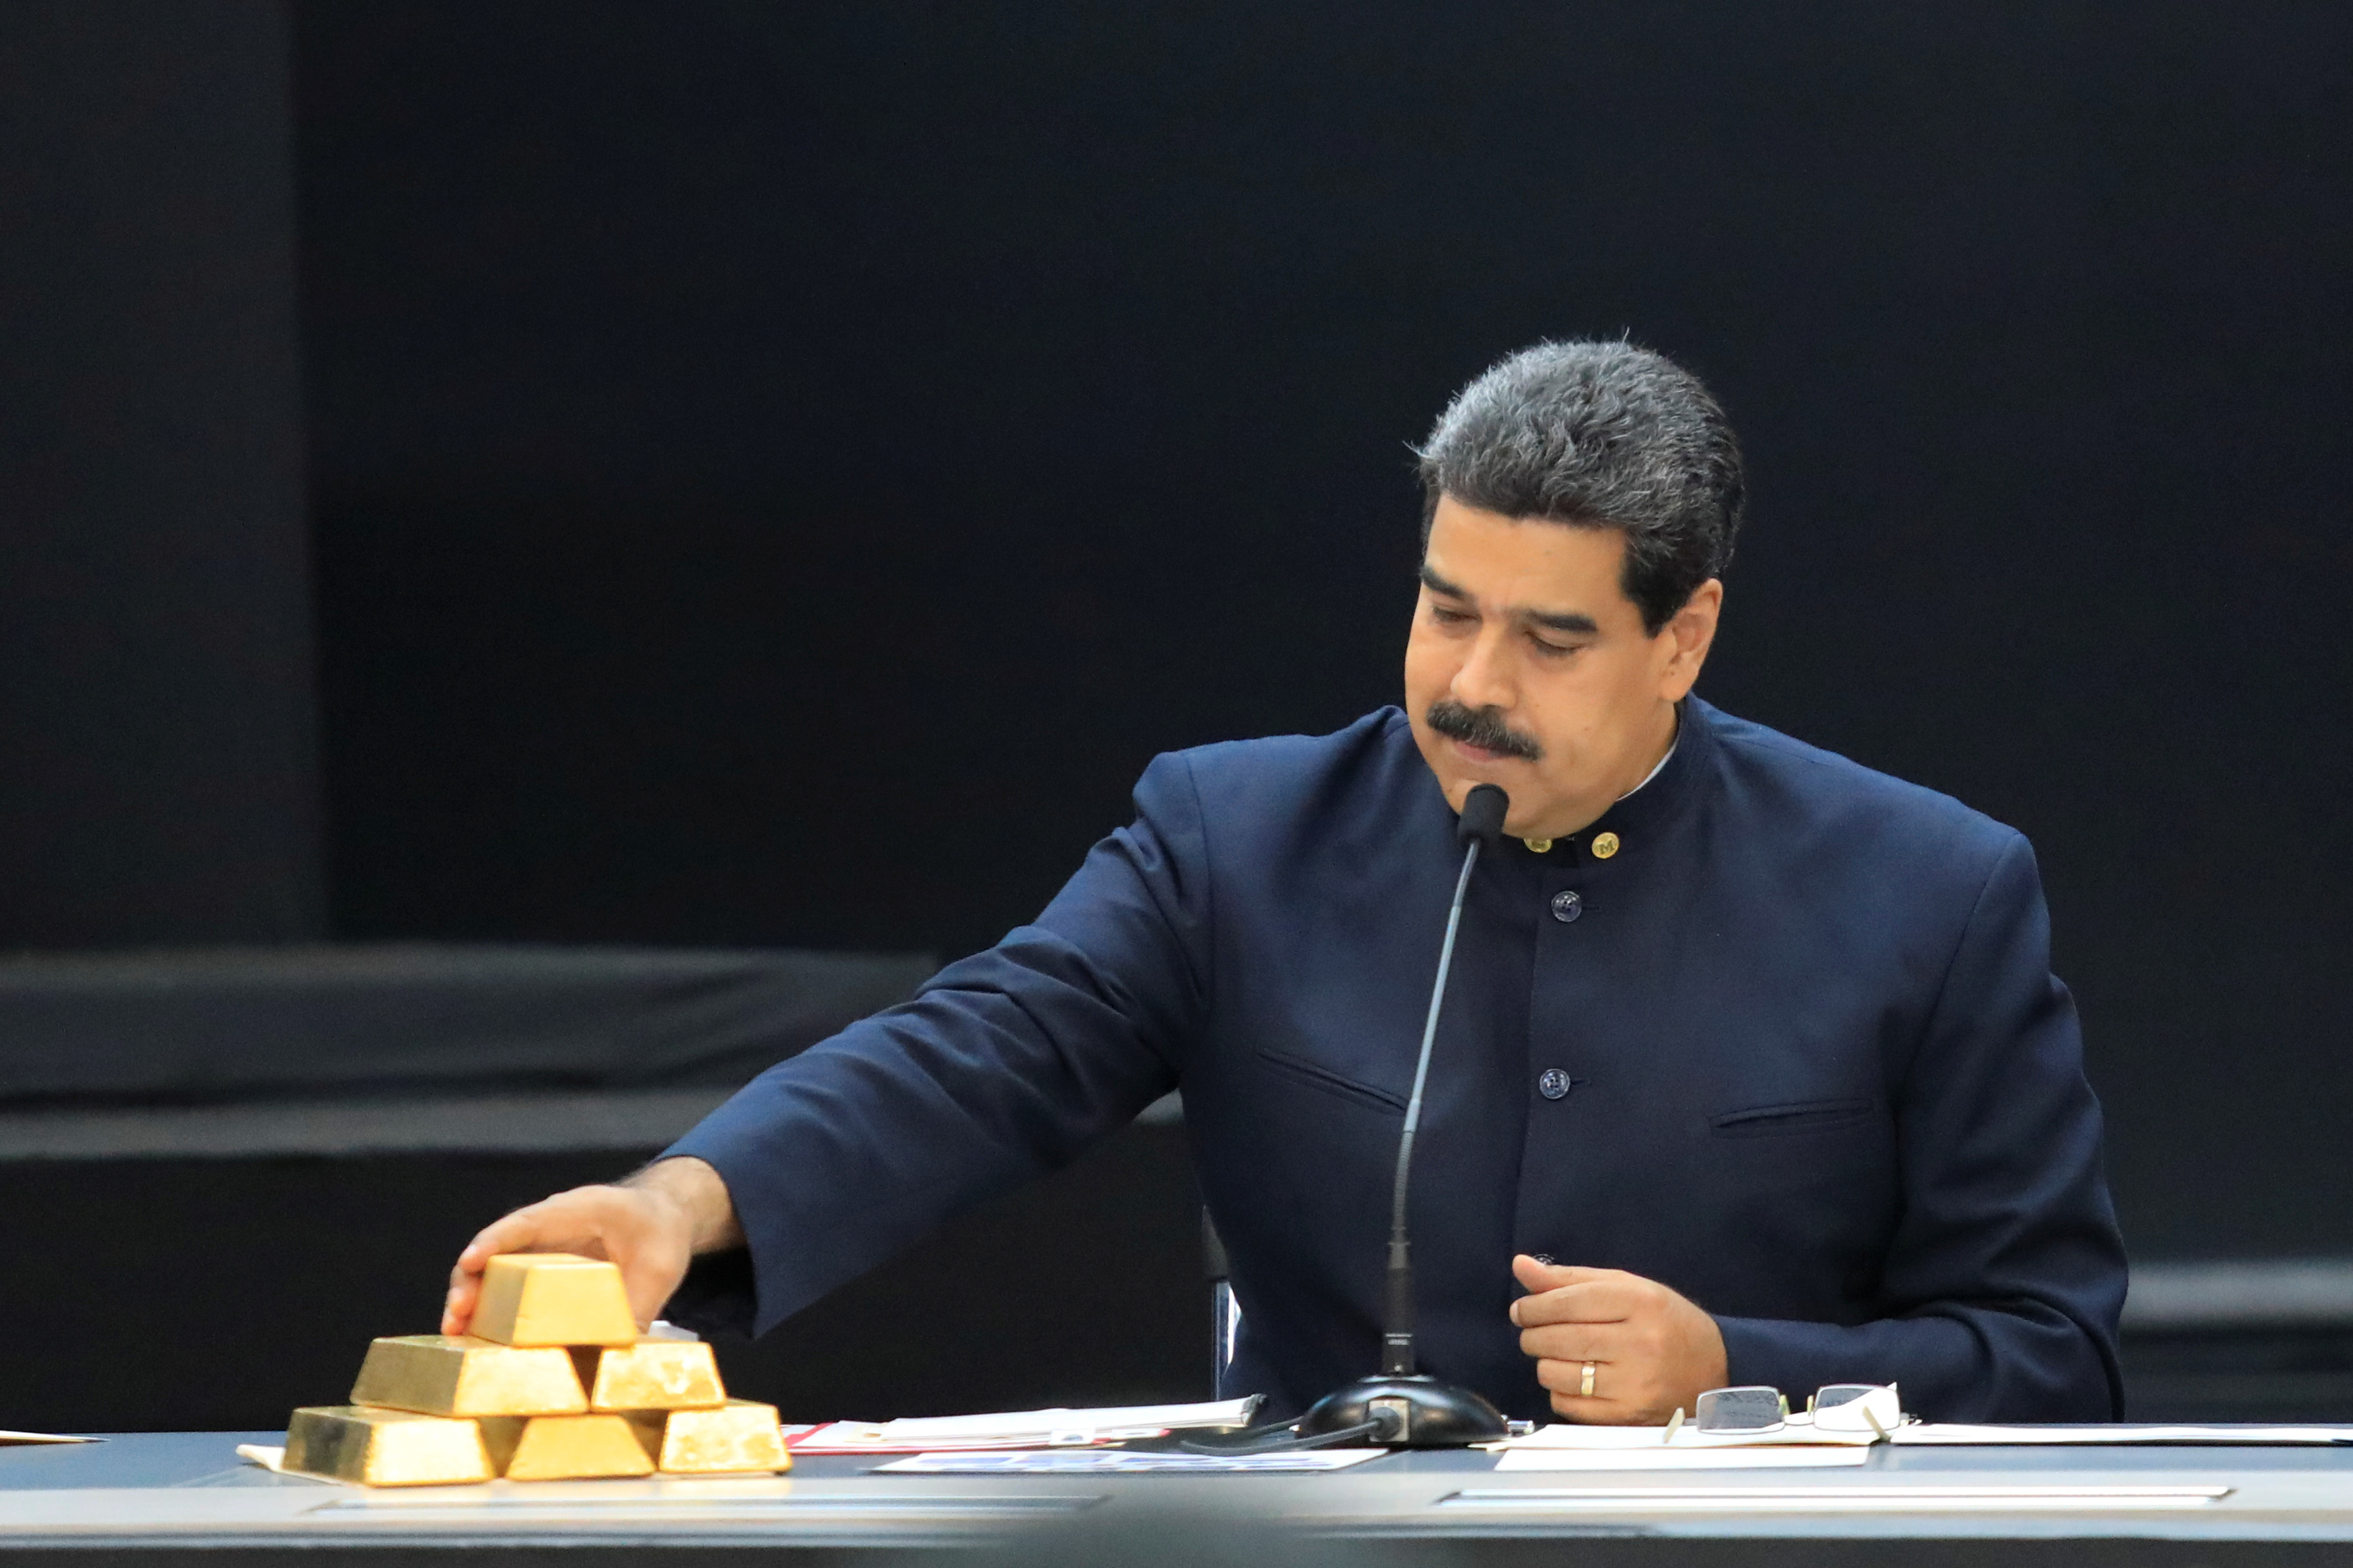 Venezuela's President Maduro touches a gold bar as he speaks during a meeting with the ministers responsible for the economic sector in Caracas